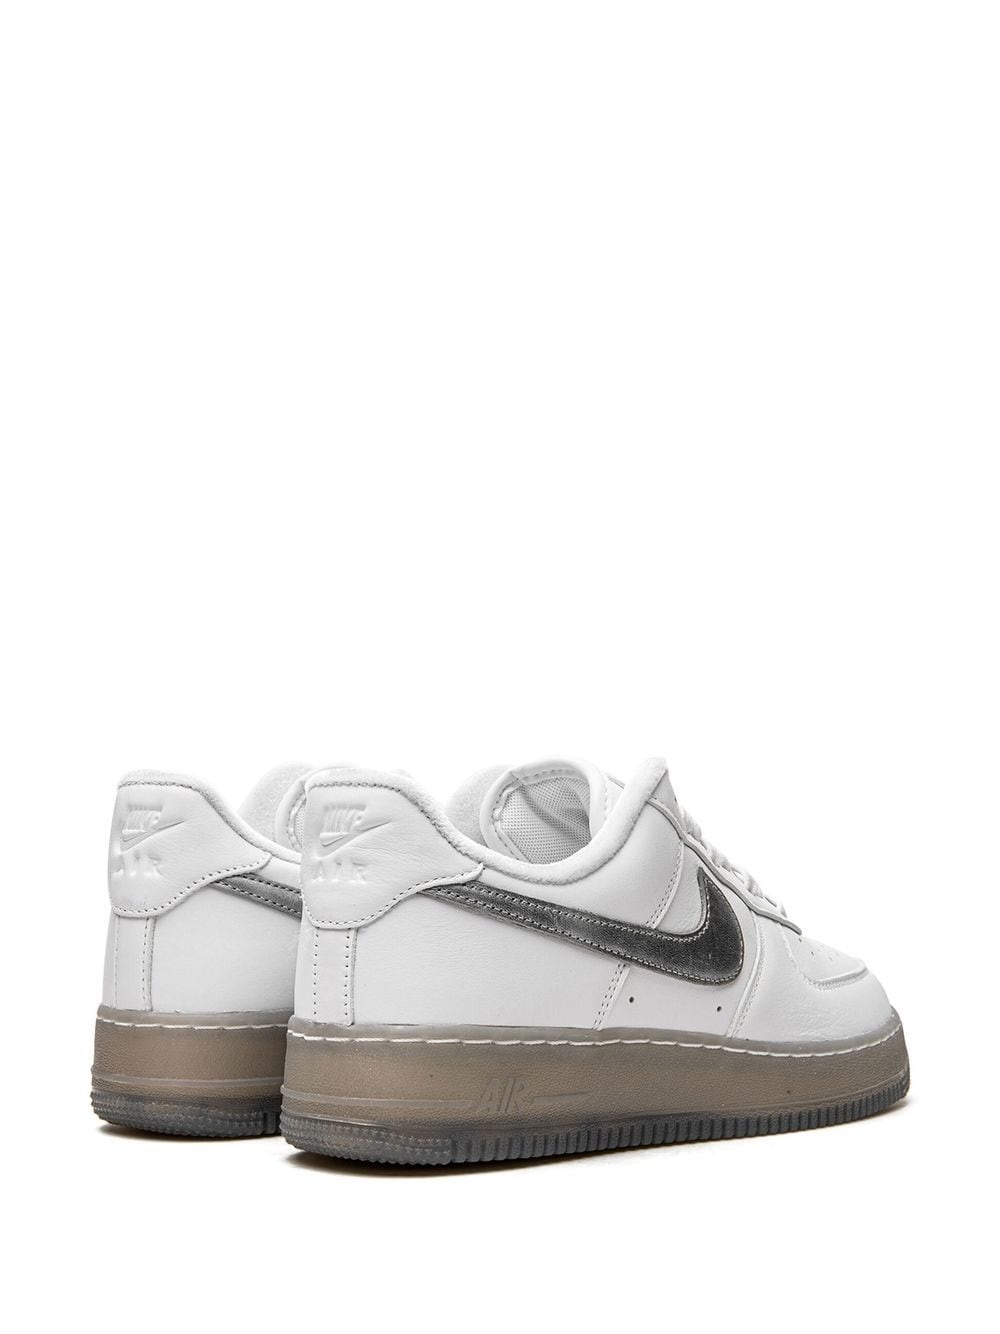 Air Force 1 "White/Metallic Silver" sneakers - 3